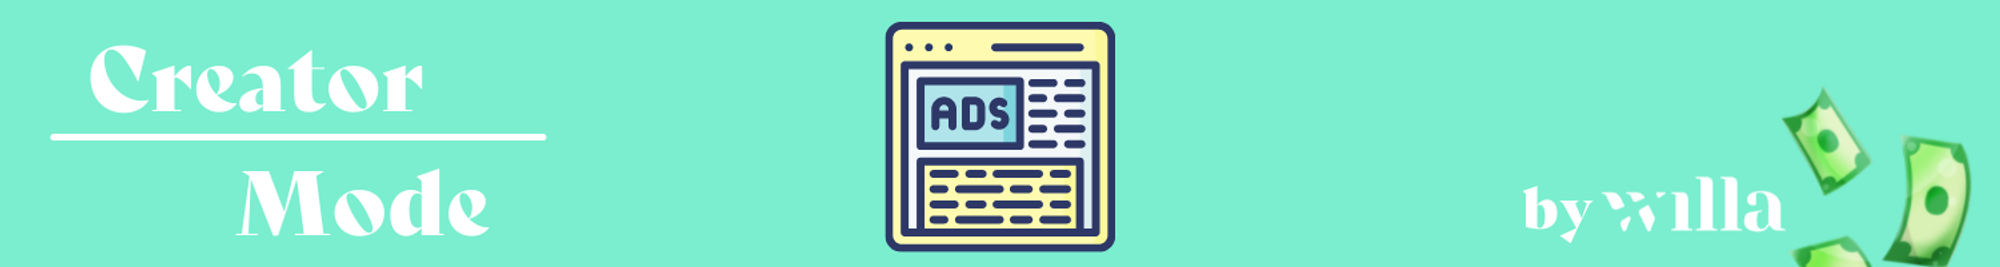 Does Using #ad Hurt Your Engagement? 